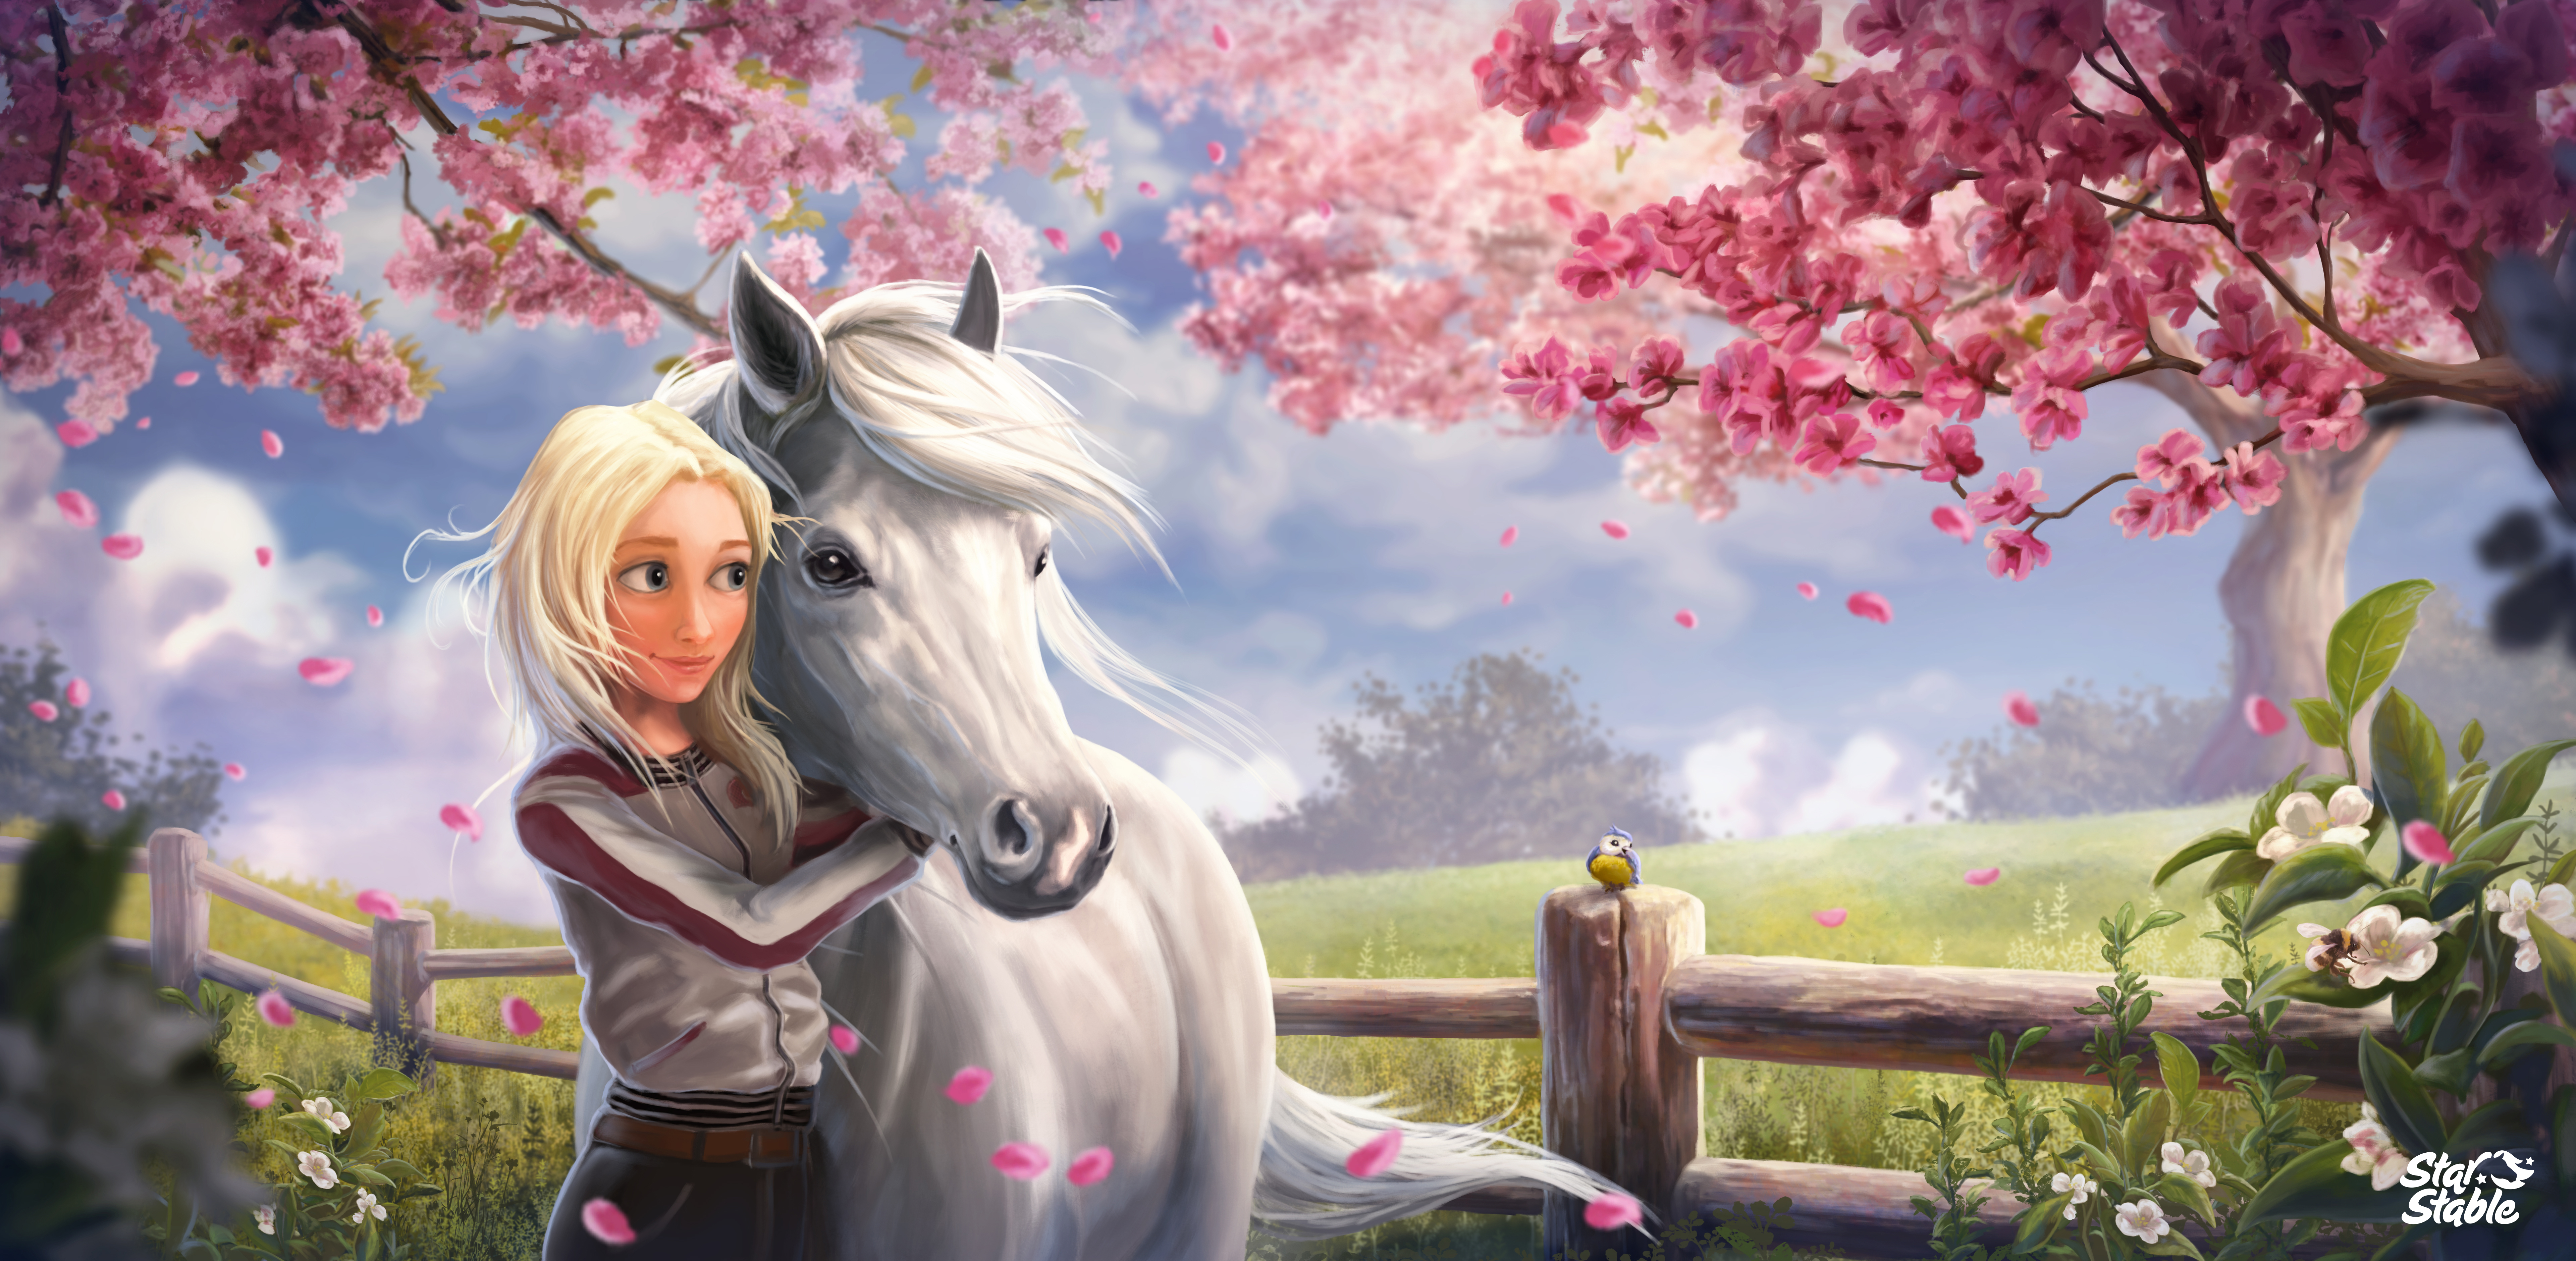 28 Star Stable Wallpaper ideas  star stable star stable horses stables